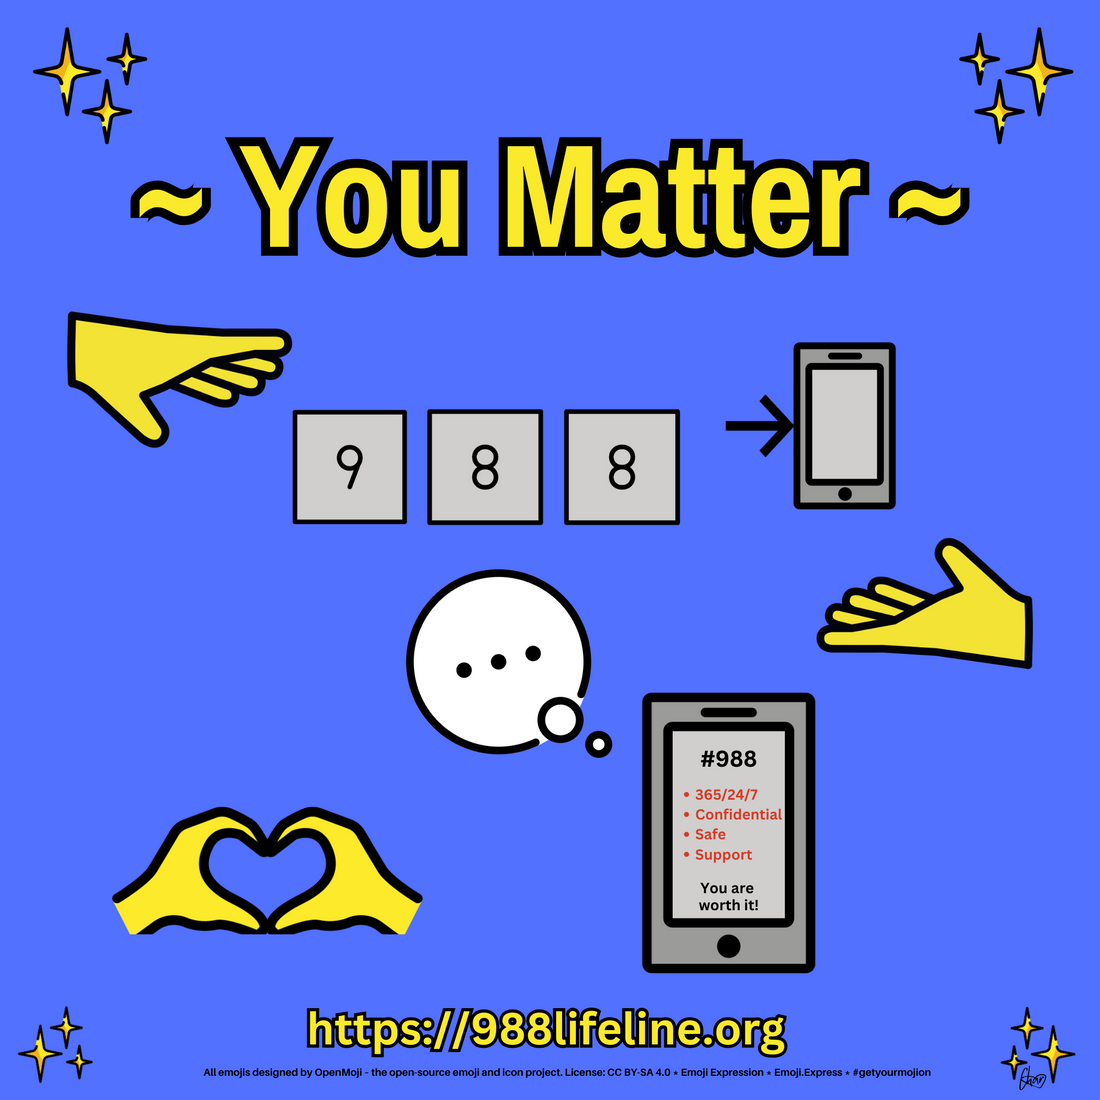 #YouMatter - How to Get Help in Crisis (Suicide/988) 🫶